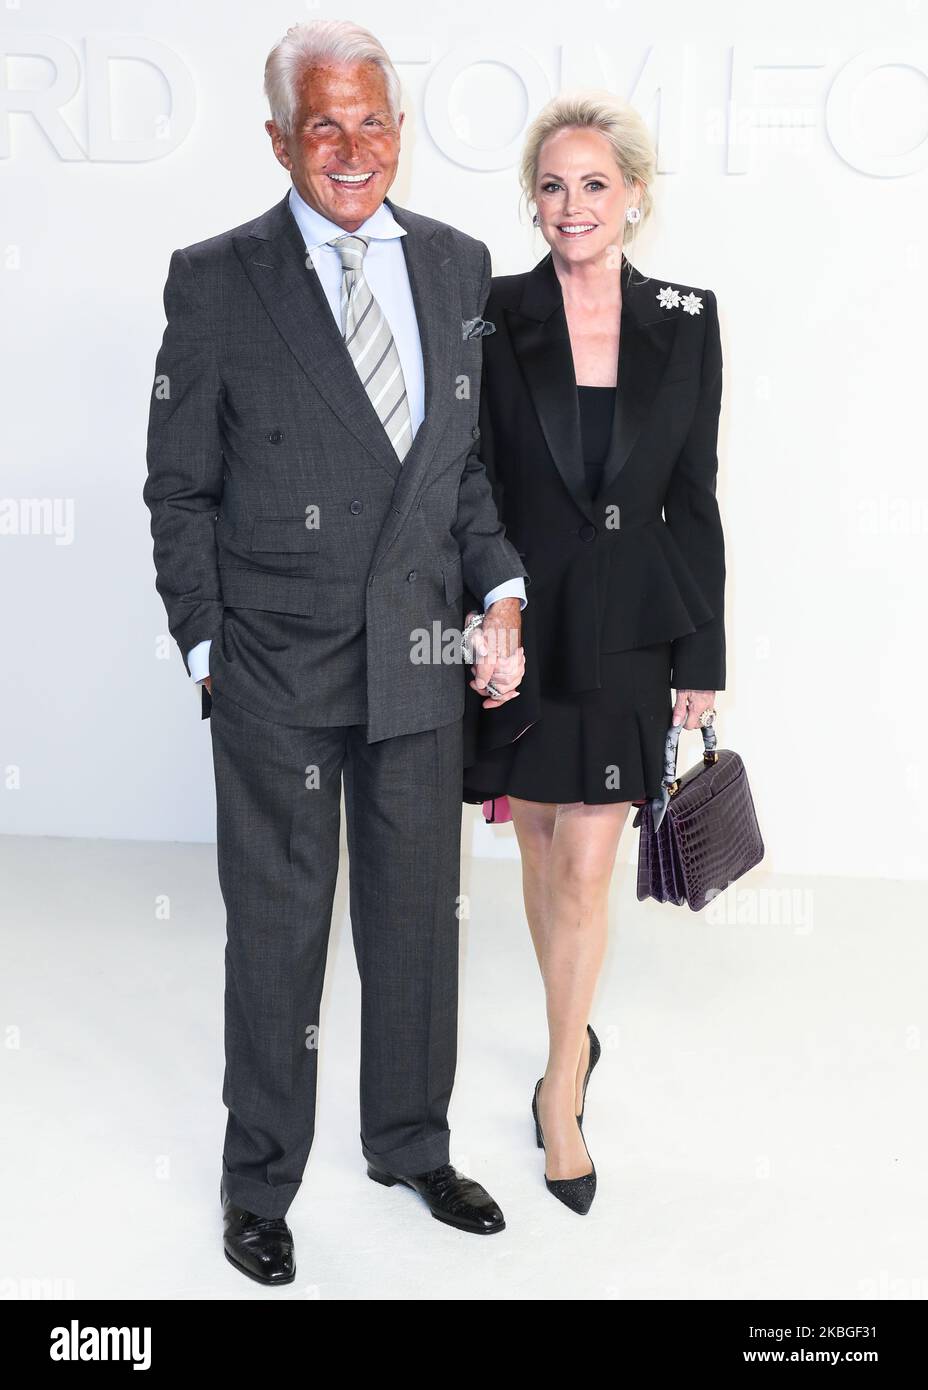 HOLLYWOOD, LOS ANGELES, CALIFORNIA, USA - FEBRUARY 07: George Hamilton and Barbara Sturm arrive at the Tom Ford: Autumn/Winter 2020 Fashion Show held at Milk Studios on February 7, 2020 in Hollywood, Los Angeles, California, United States. (Photo by Xavier Collin/Image Press Agency/NurPhoto) Stock Photo